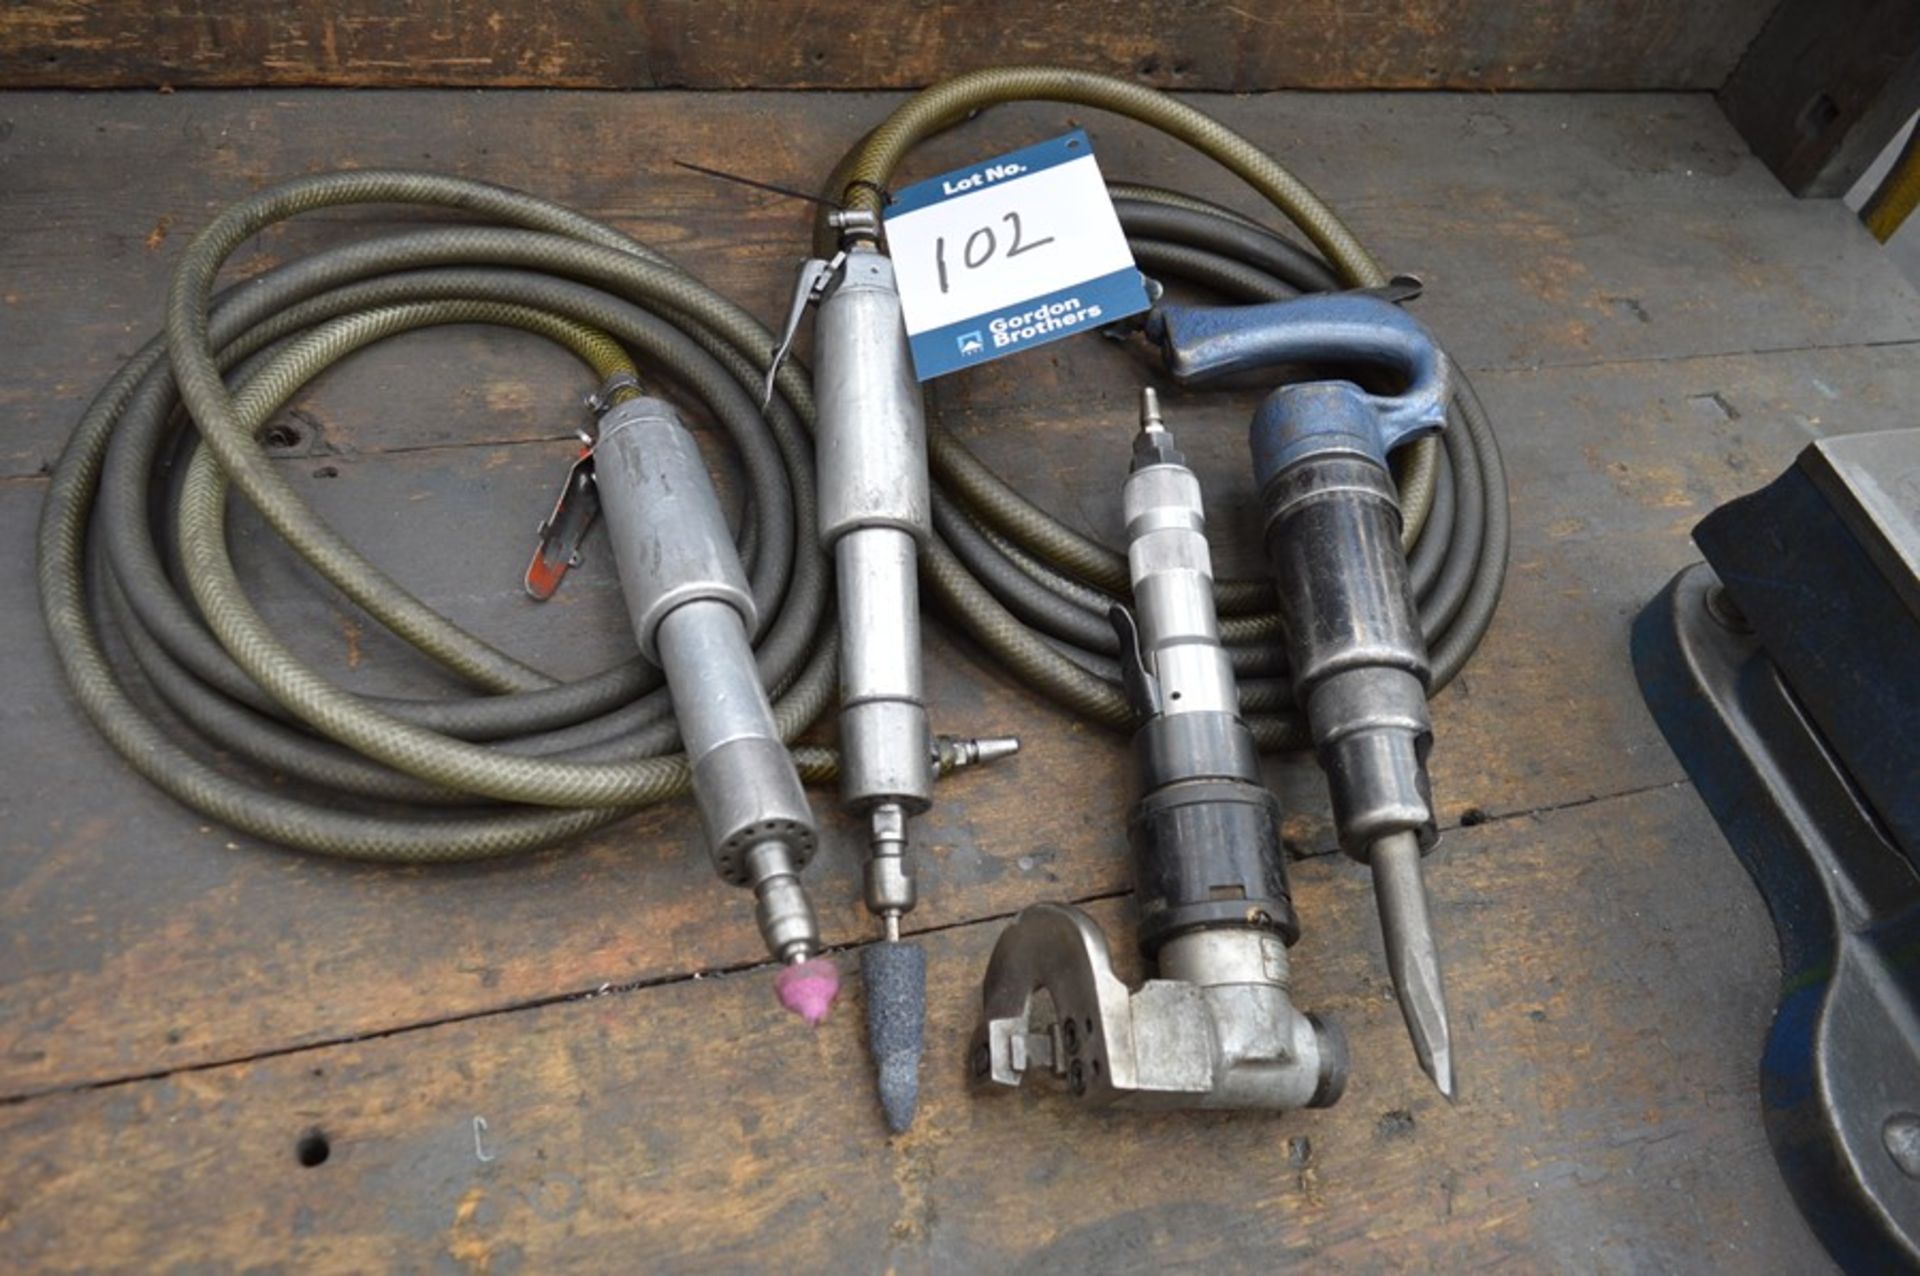 2 x Pneumatic grinders; 1 x Desoutter nibbler and 1 x Kango drill, as lotted